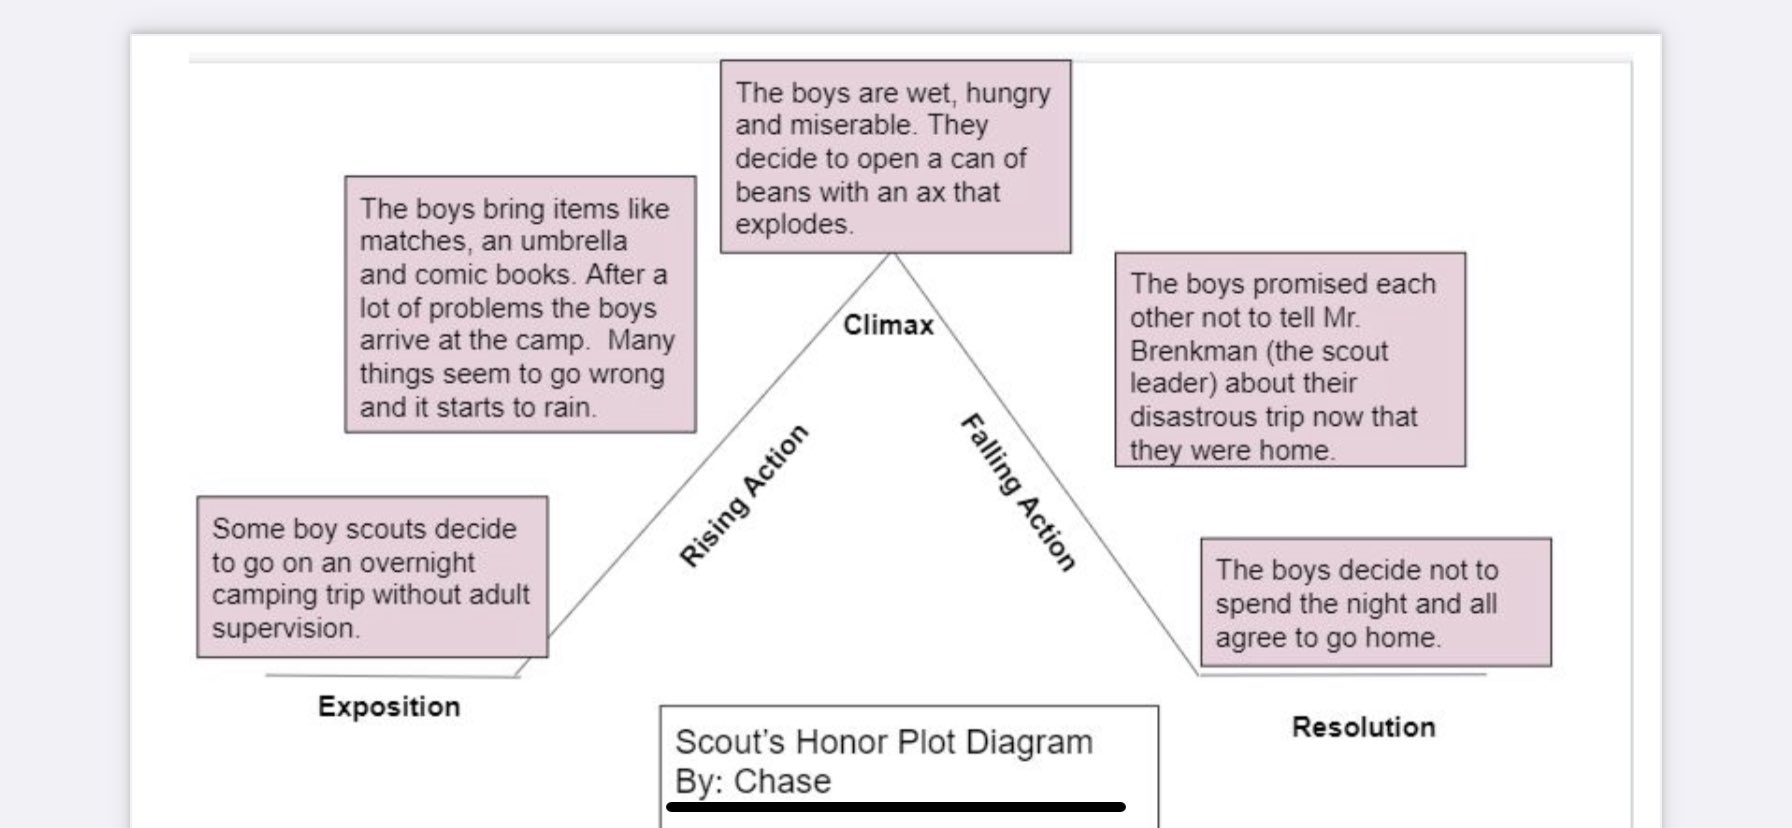 Marley Middle School On Twitter Ms Jennings And Ms Maddox Teacher Of The Year Nominee Using A Plot Diagram For Scout S Honor In Their Language Arts Classes Marleymagic Https T Co Wuzgr2jmmx